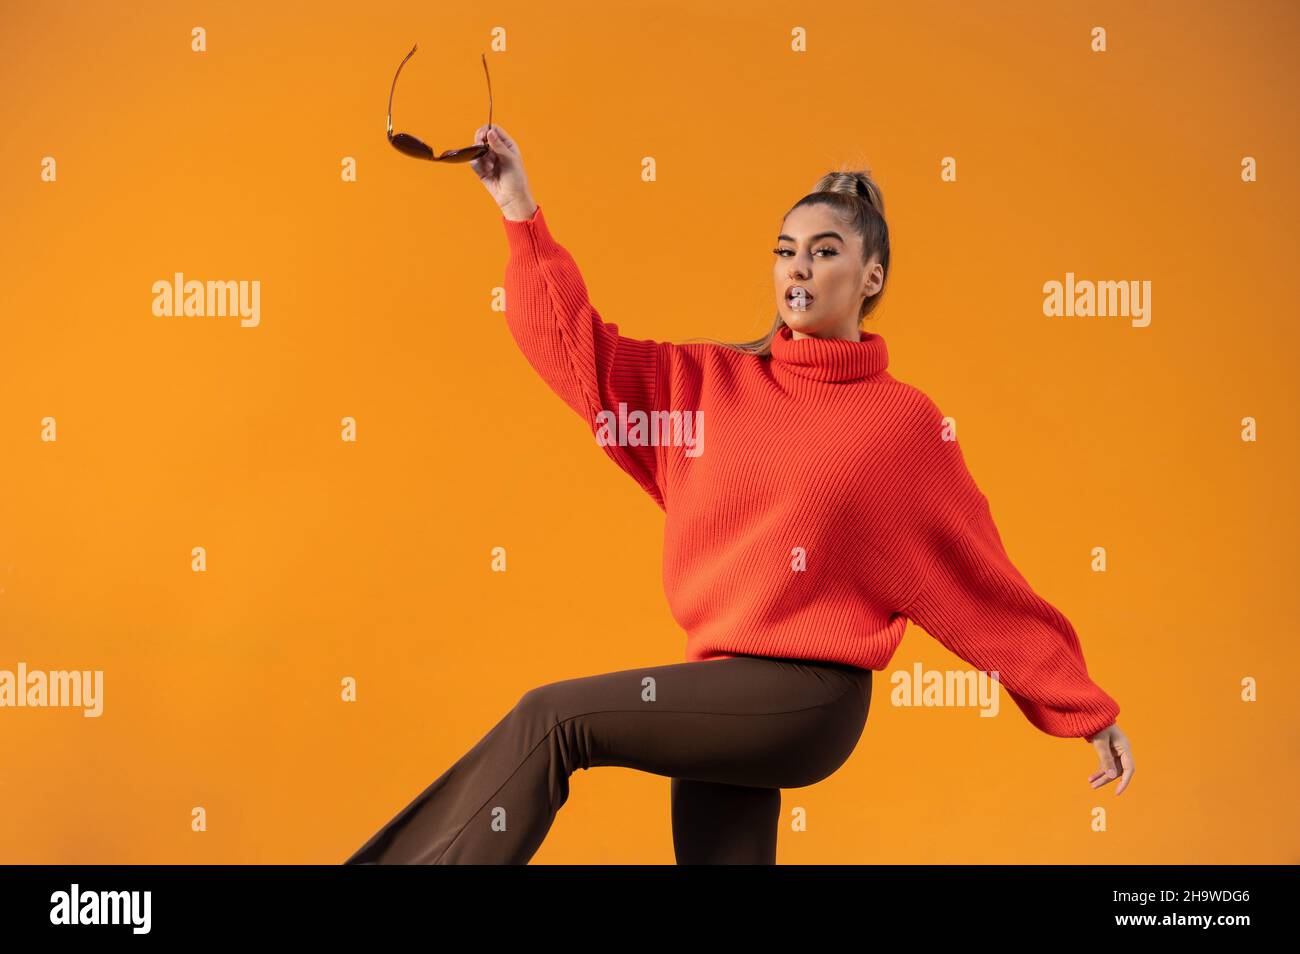 Stylish female posing in the orange background is wearing a bright sweater Stock Photo